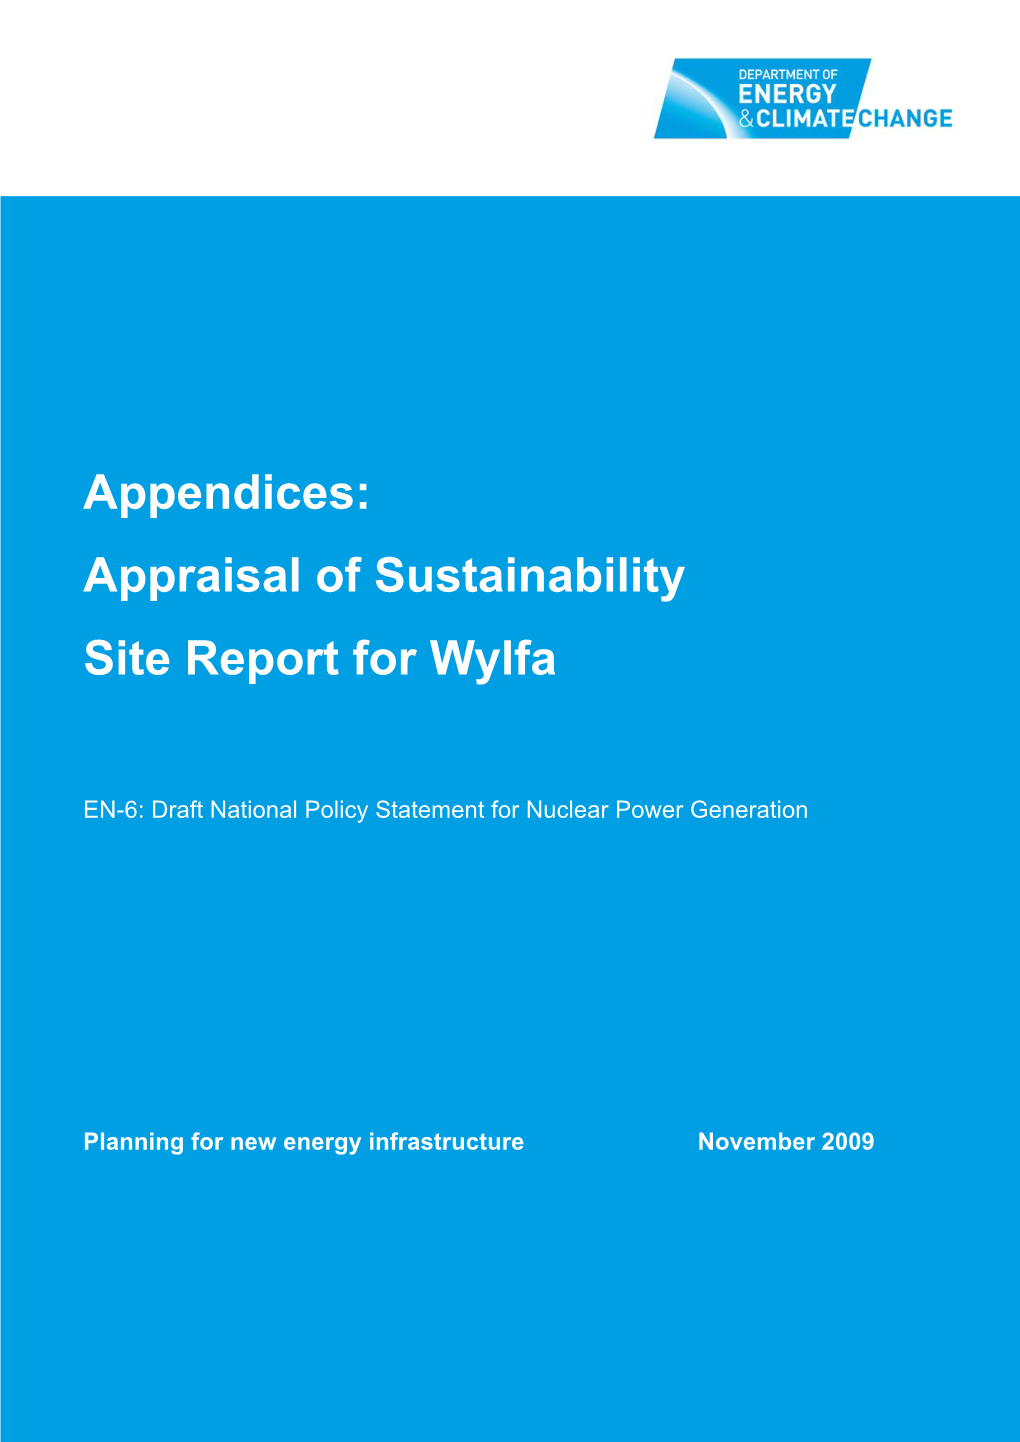 Appendices: Appraisal of Sustainability Site Report for Wylfa